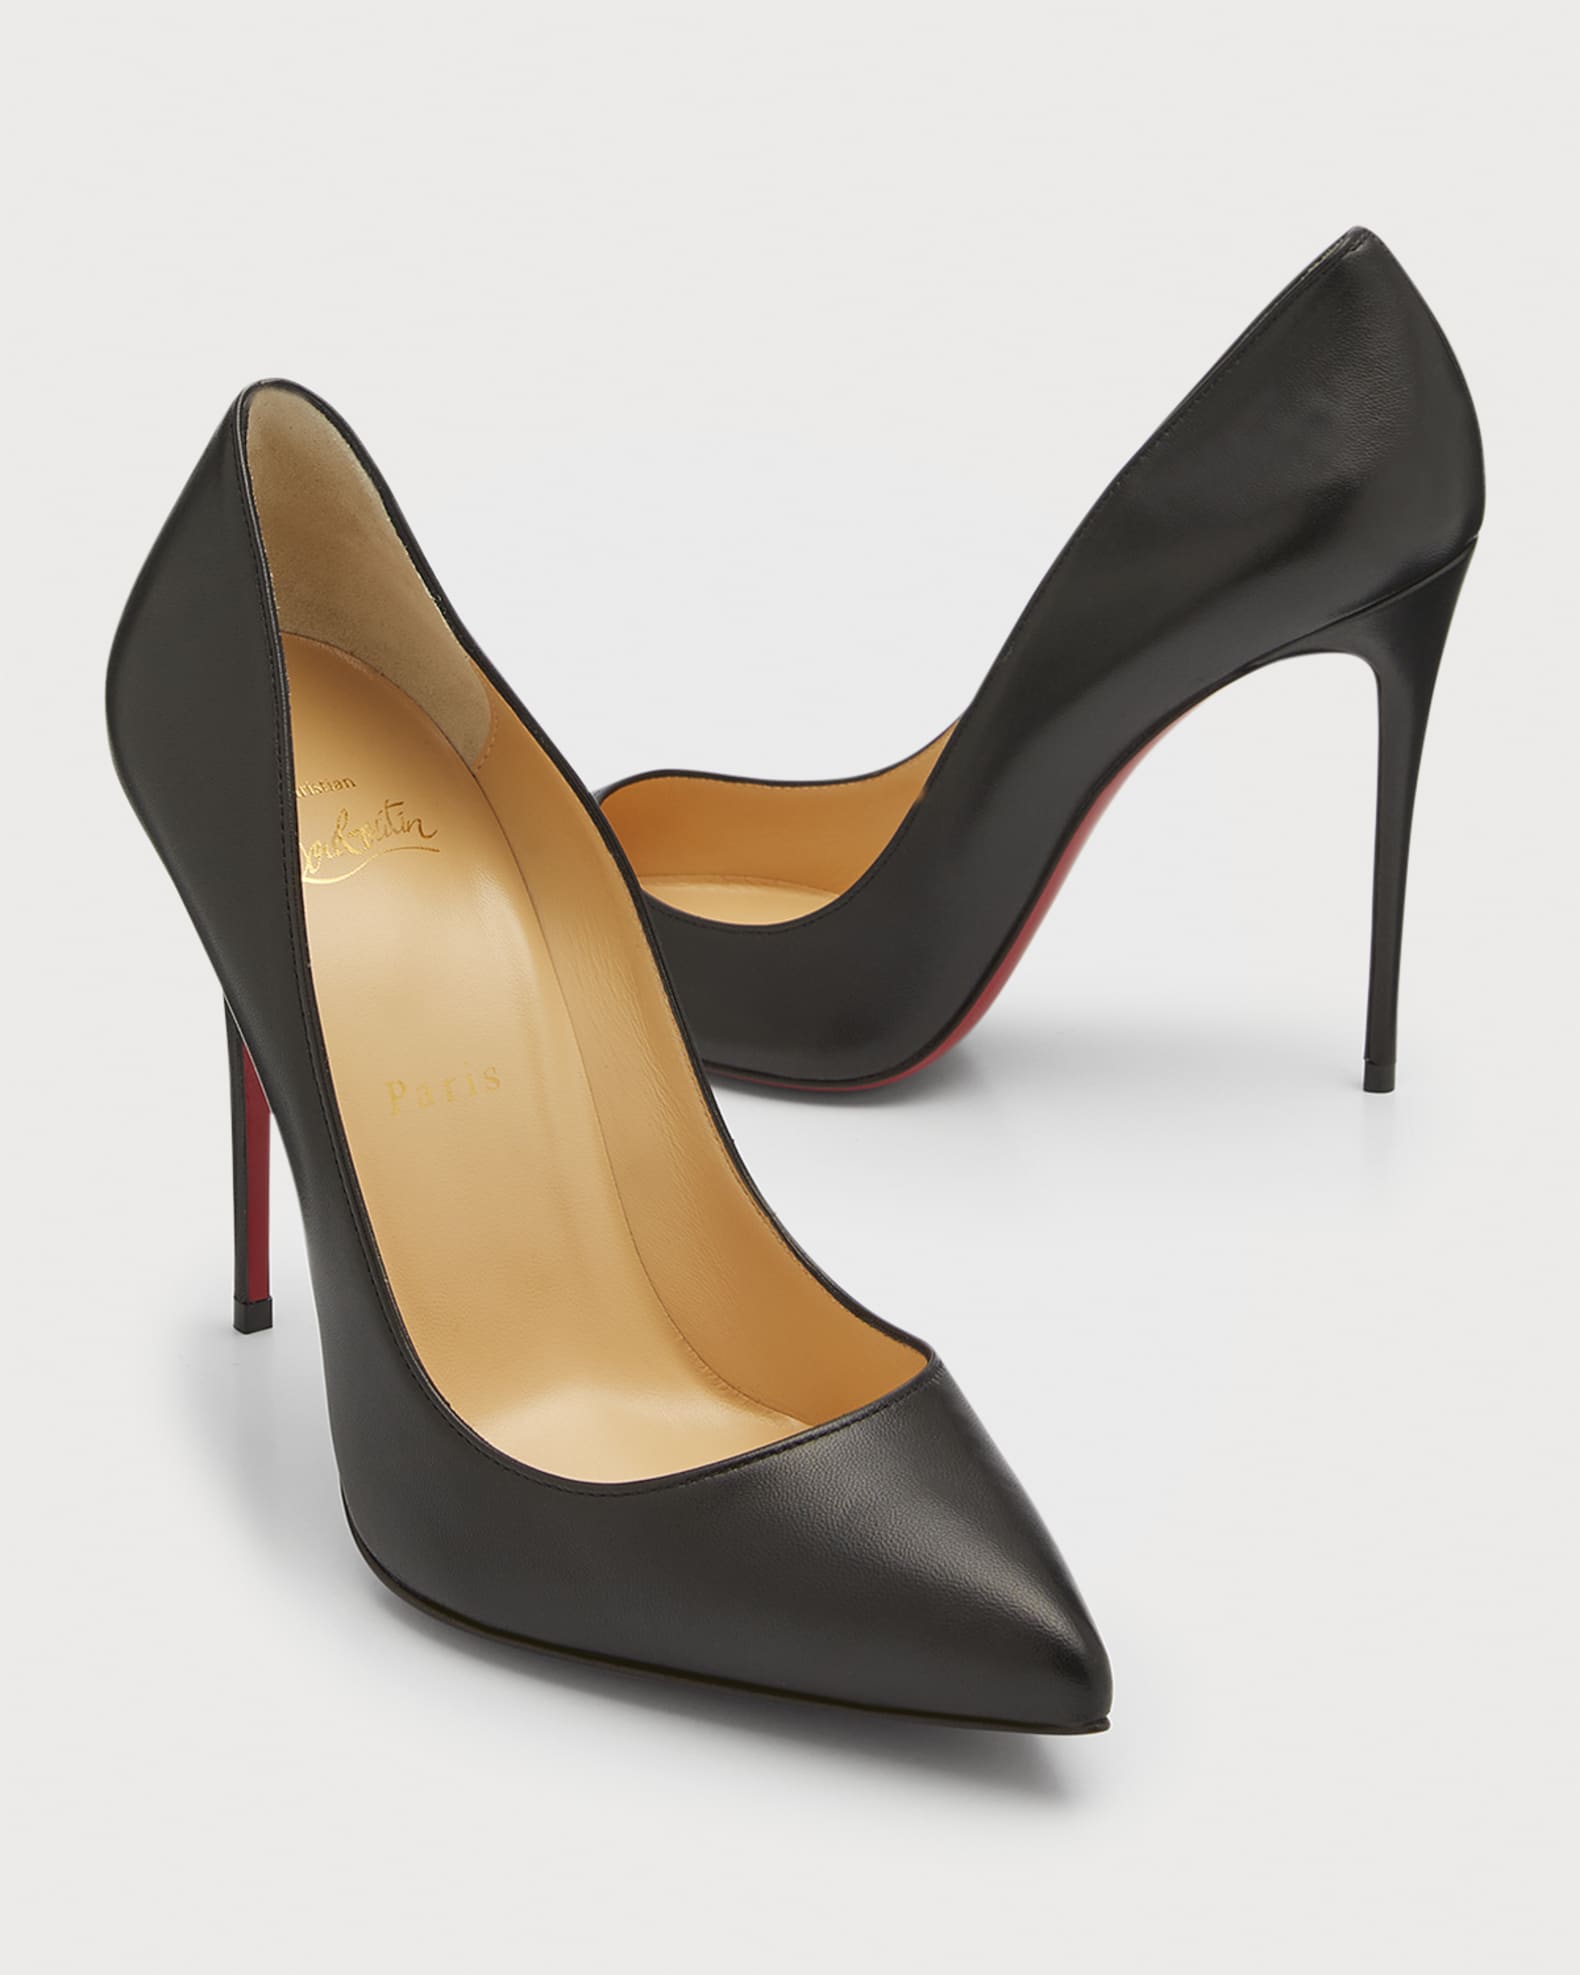 Louboutin heels are forever! Watch how a pair of red bottoms is